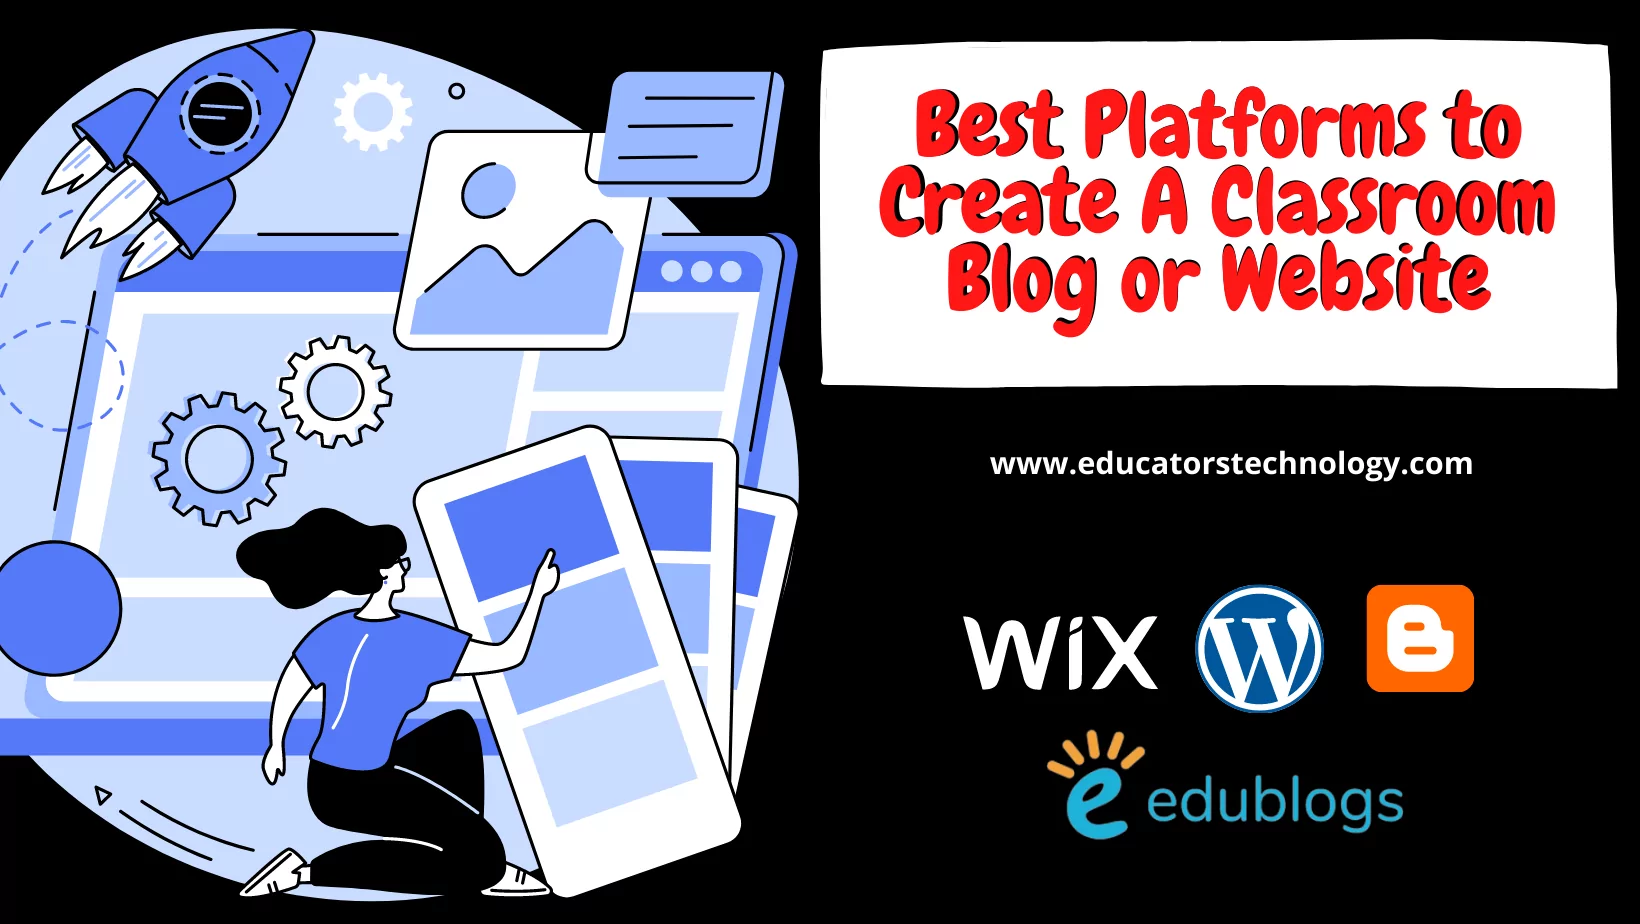 Platforms to create classroom blogs and websites